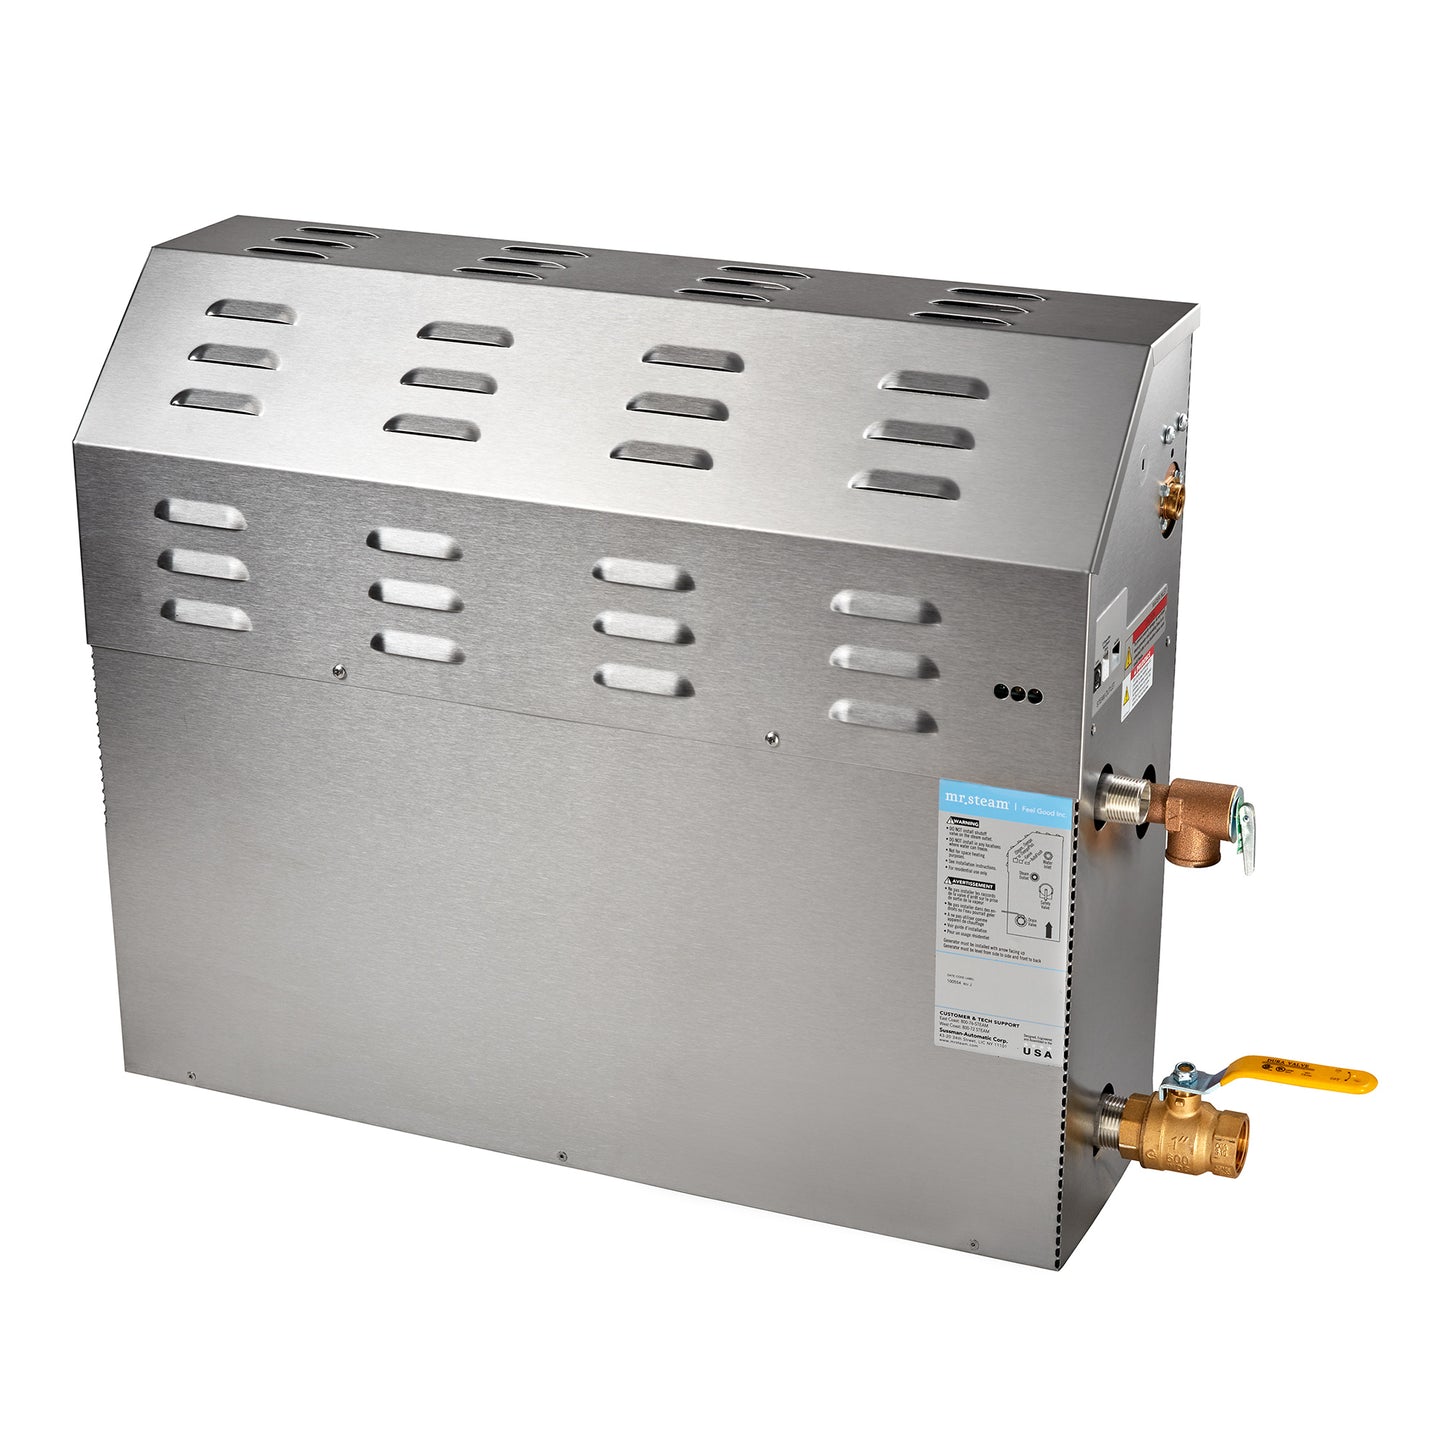 eSeries Max 20kW Express Steam Bath Generator at 240V With Express Steam